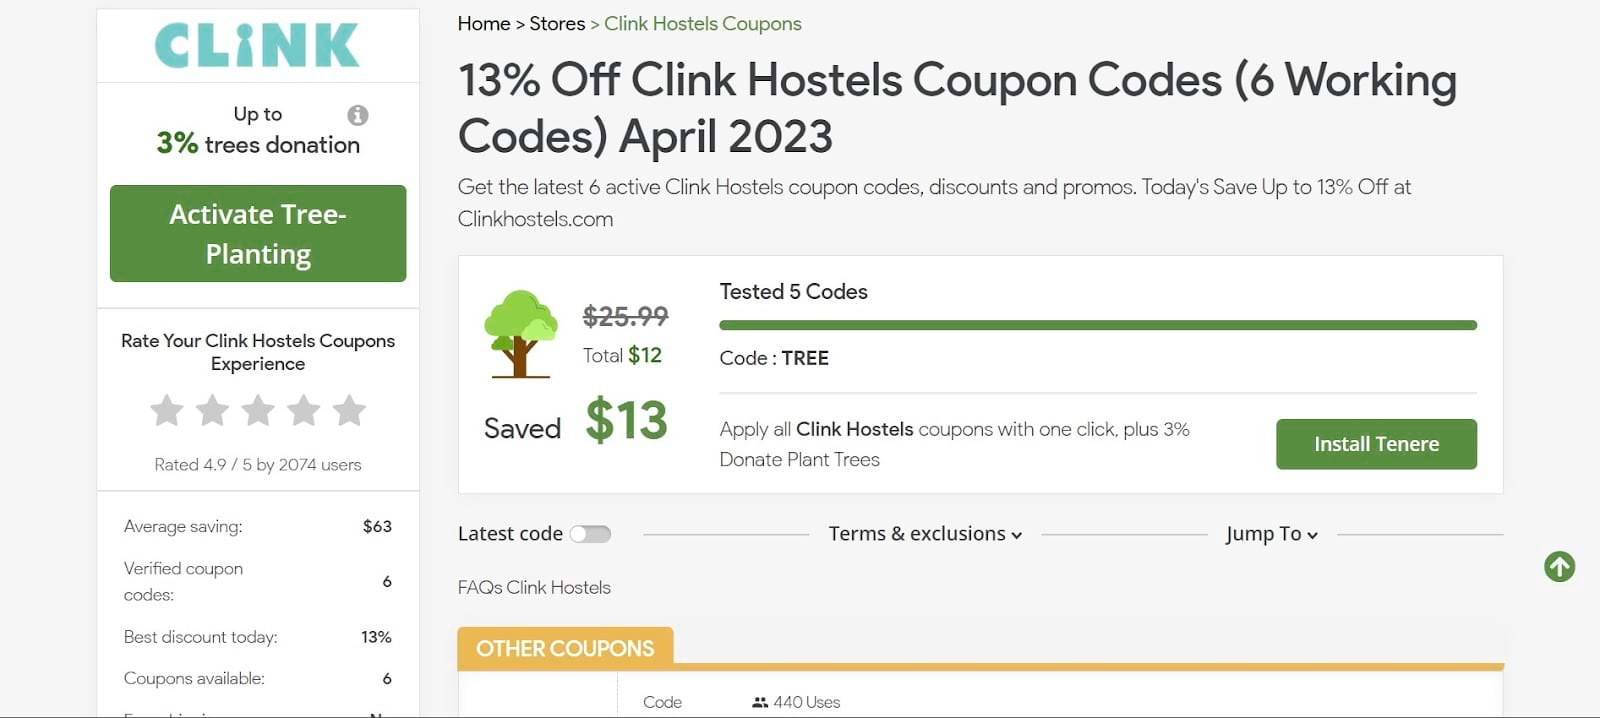 How To Use Clink Hostels Discount Code 3